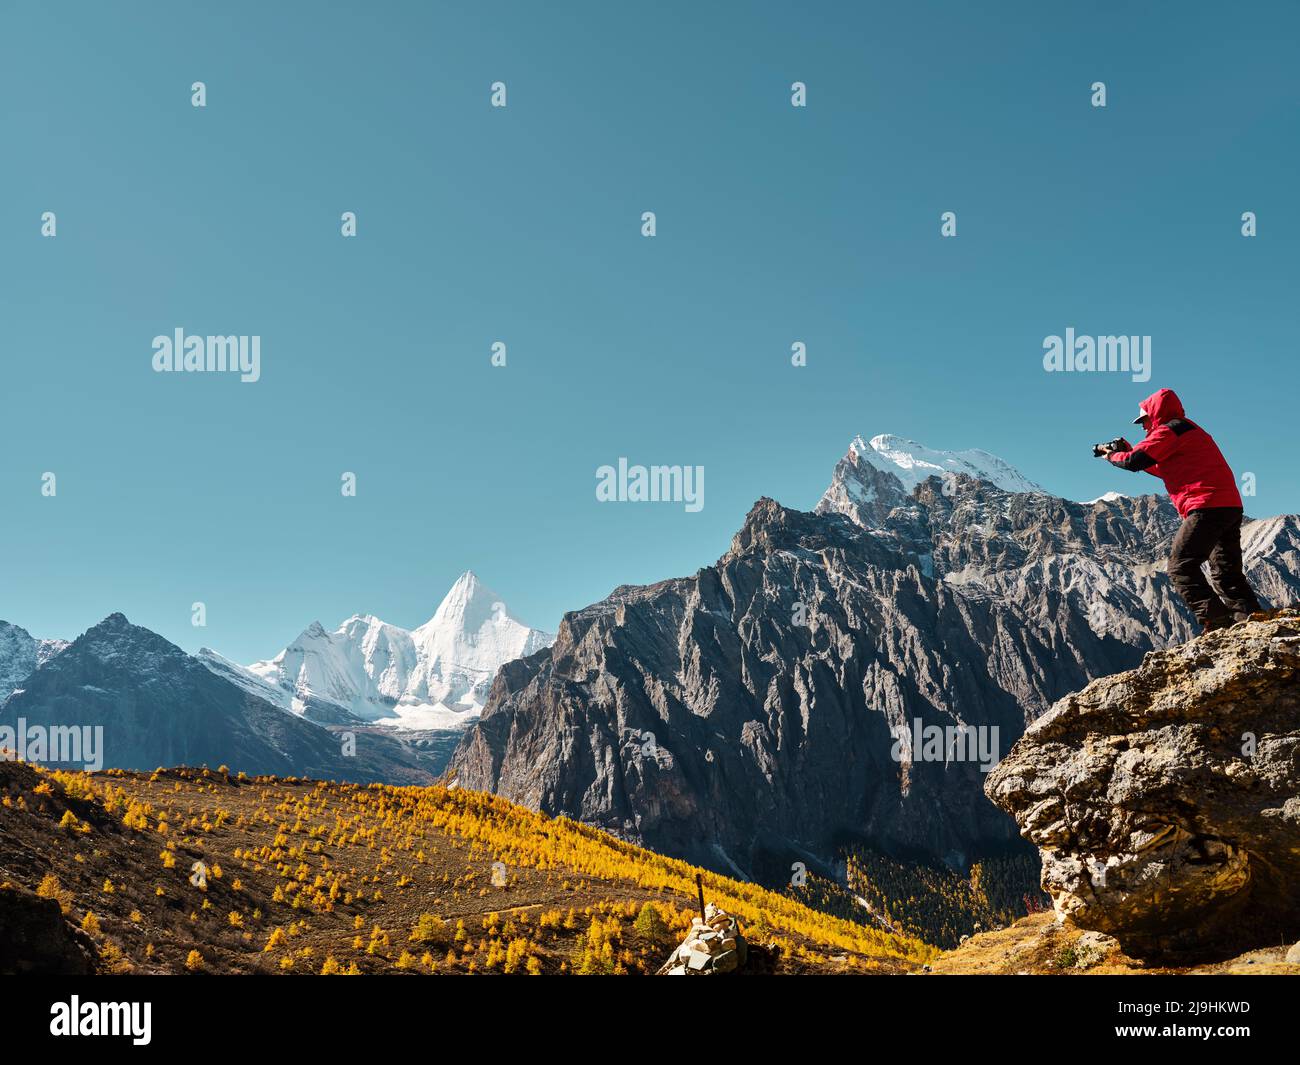 asian man standing on top of rock taking photo of Yangmaiyong (or Jampayang in Tibetan) mountain peak in the distance in Yading, Daocheng County, Sich Stock Photo